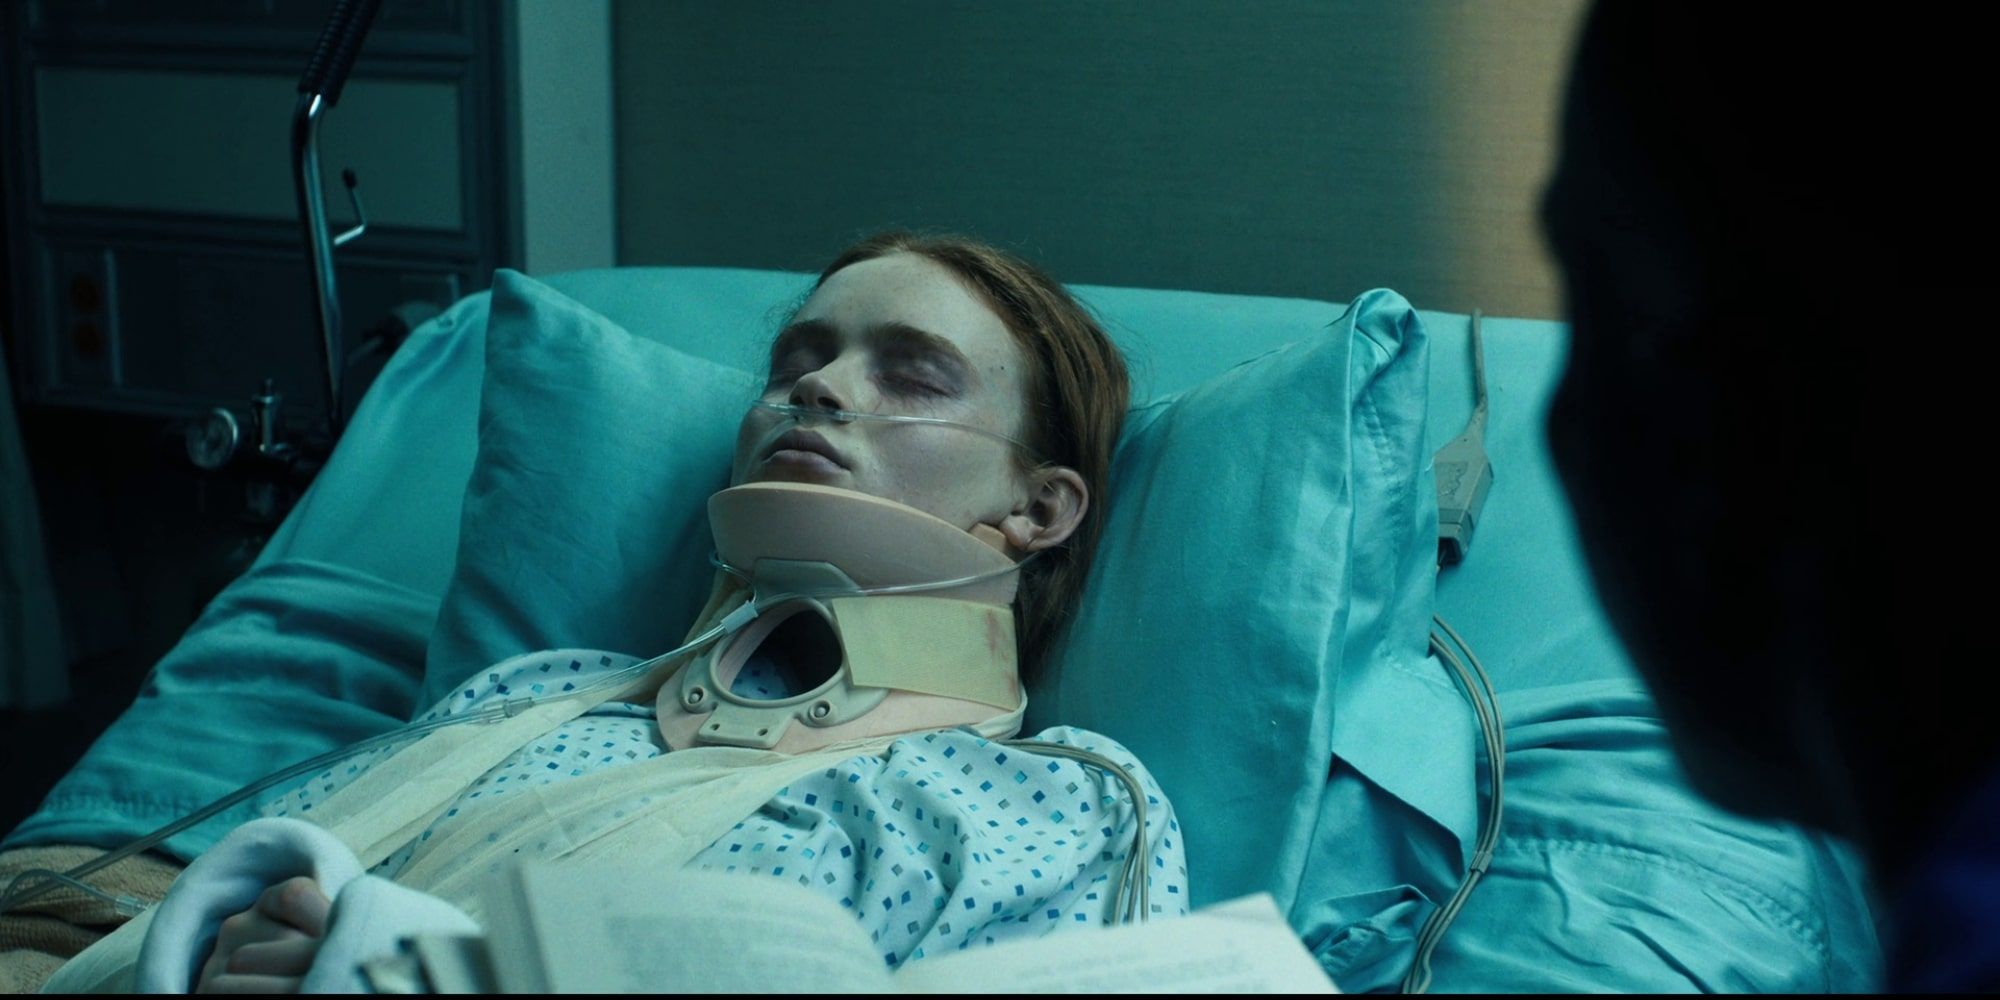 Sadie Sink as Max Mayfield in Stranger Things season 4 in comatose condition at the hospital